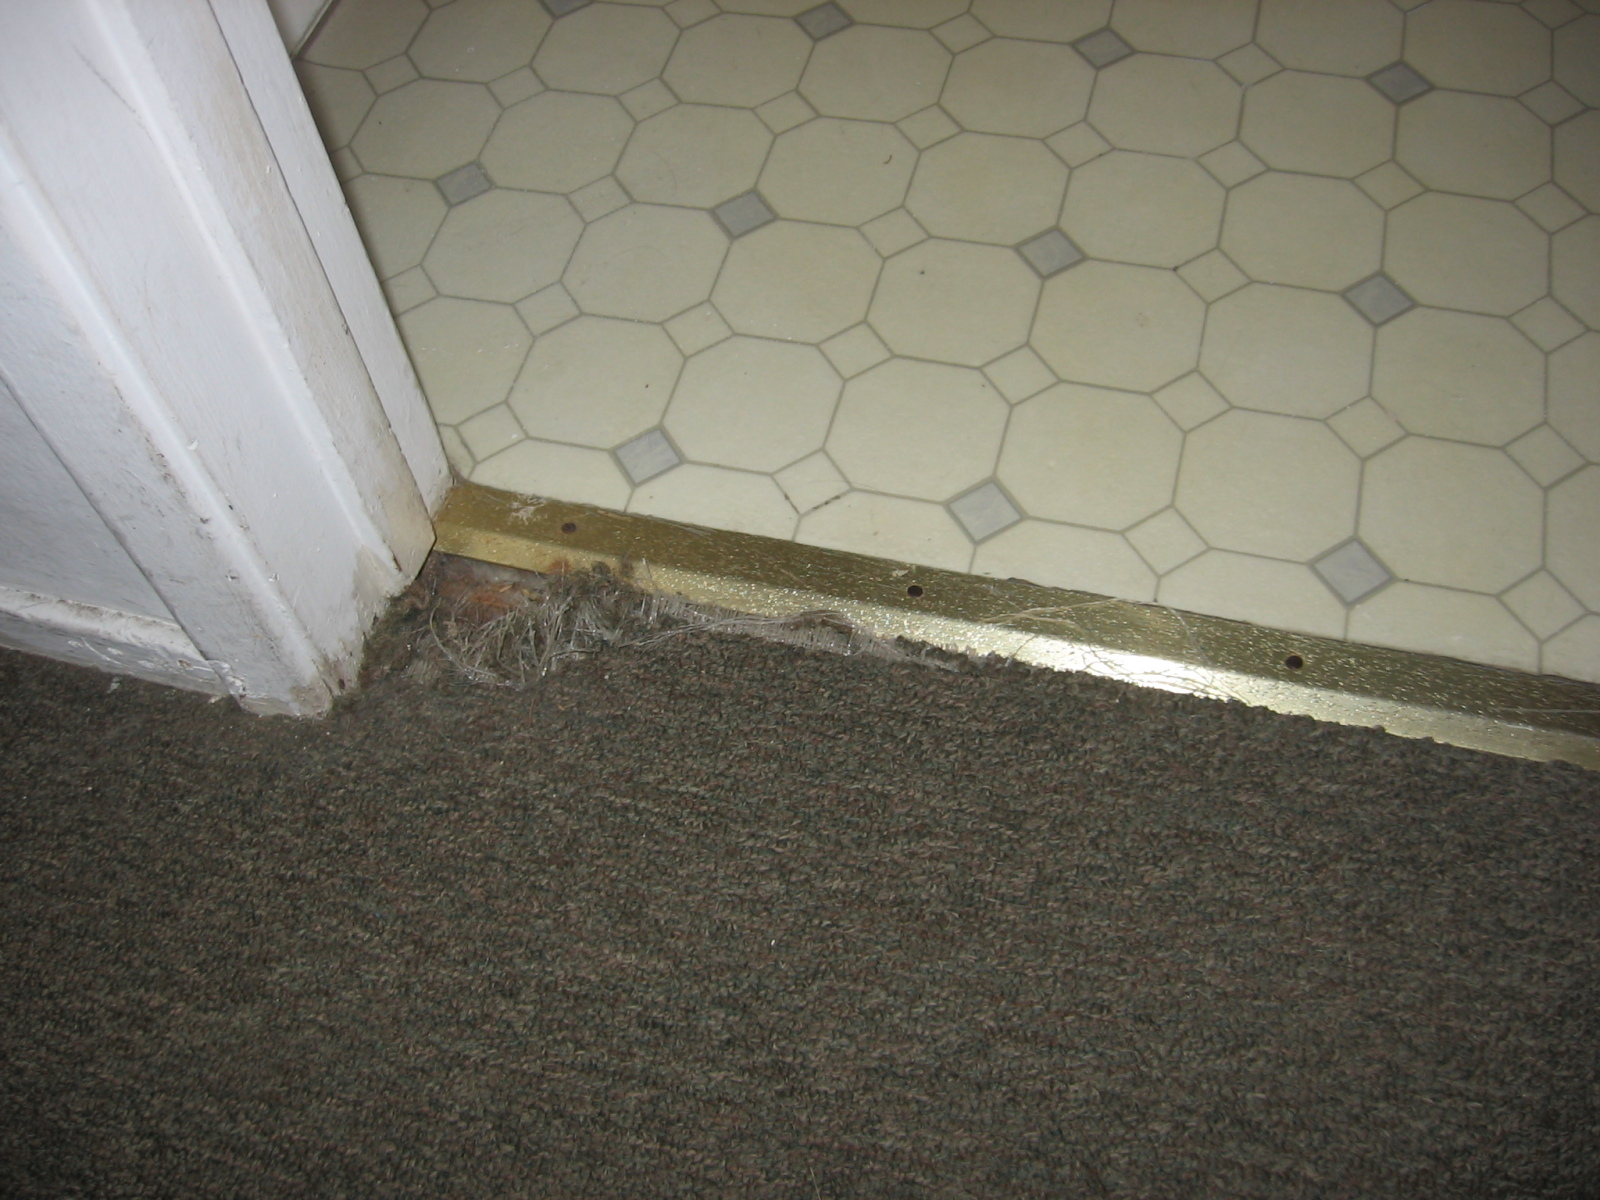 What Is Normal Wear and Tear on Carpet?